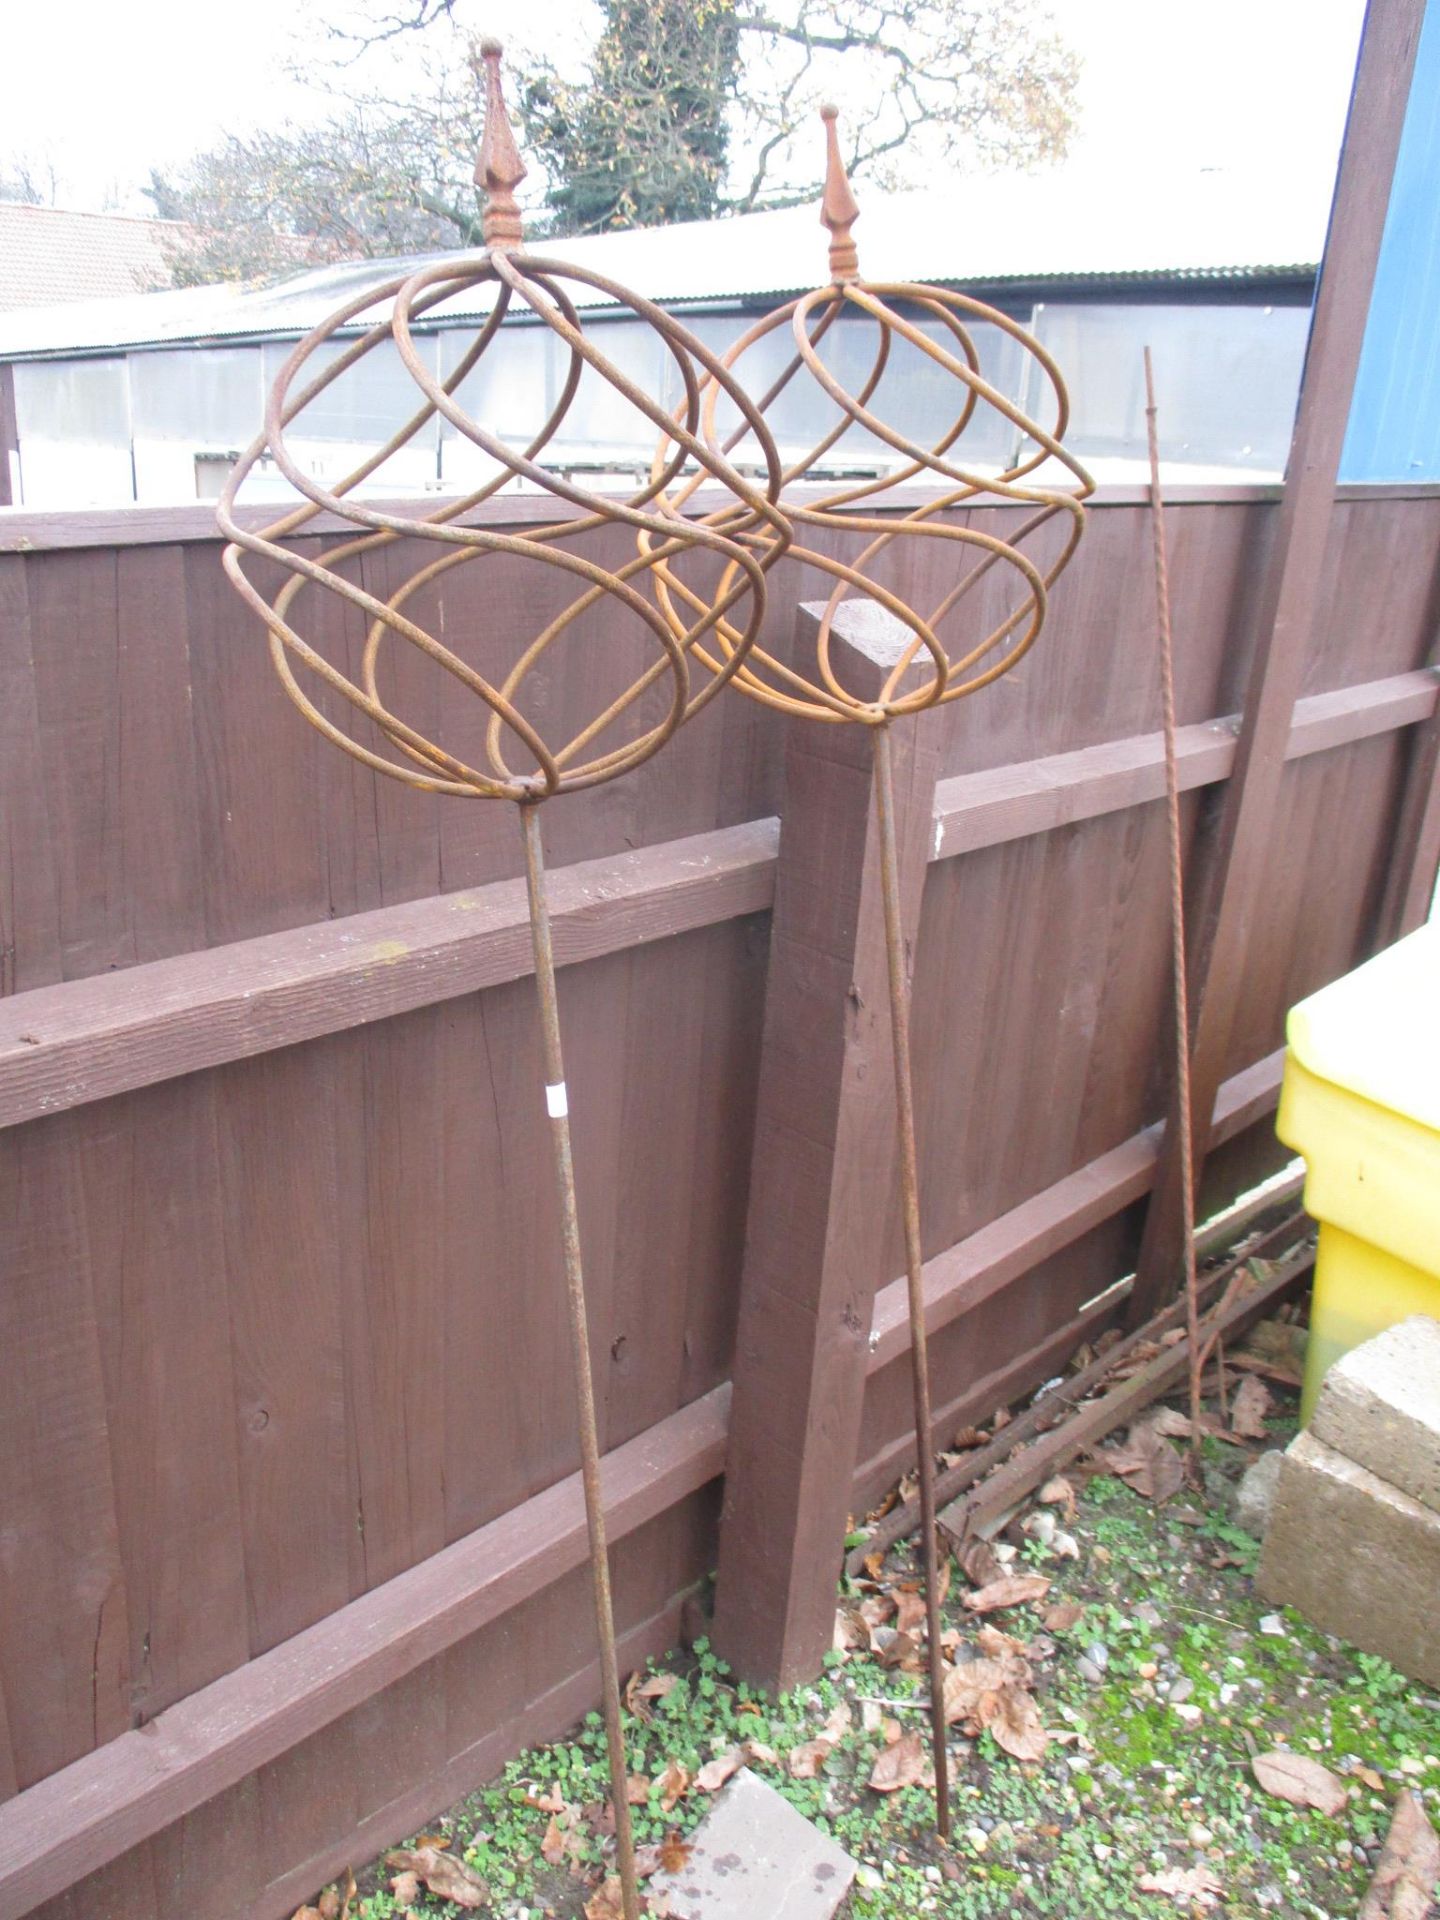 PAIR OF METAL GARDEN ORNAMENTS OF A BALL ON STICK, HEIGHT APPROX 160CM